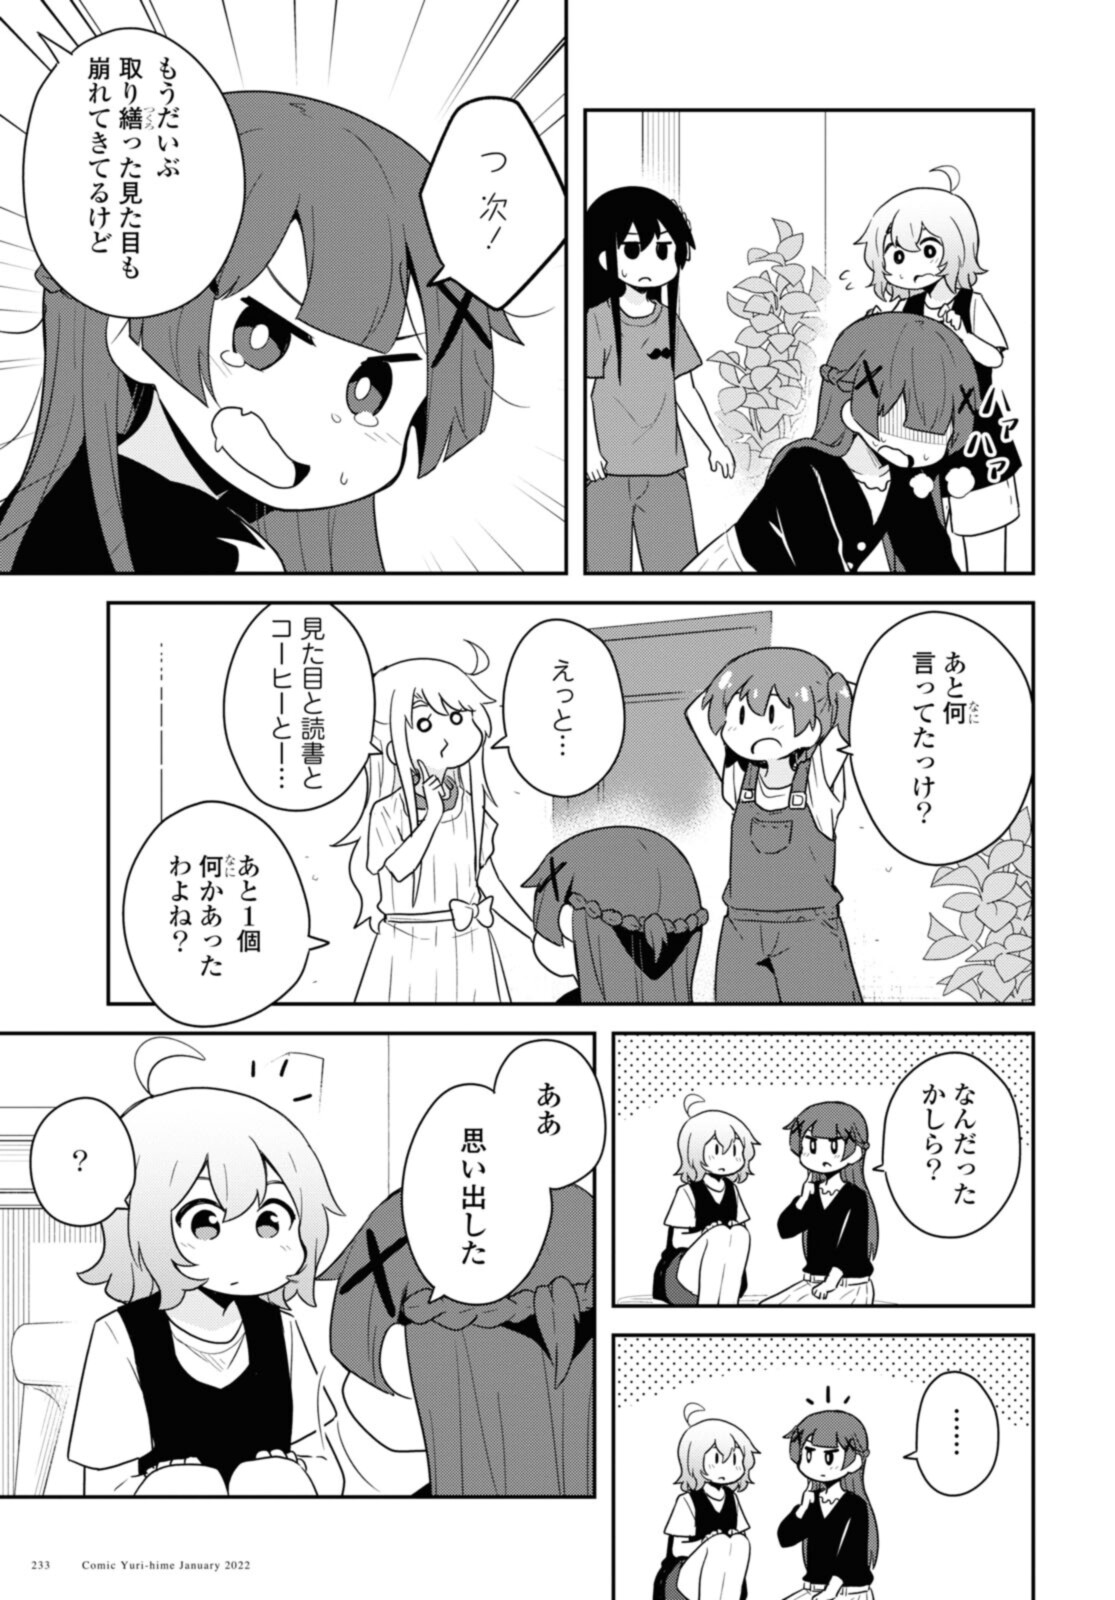 Wataten! An Angel Flew Down to Me 私に天使が舞い降りた！ 第91話 - Page 13